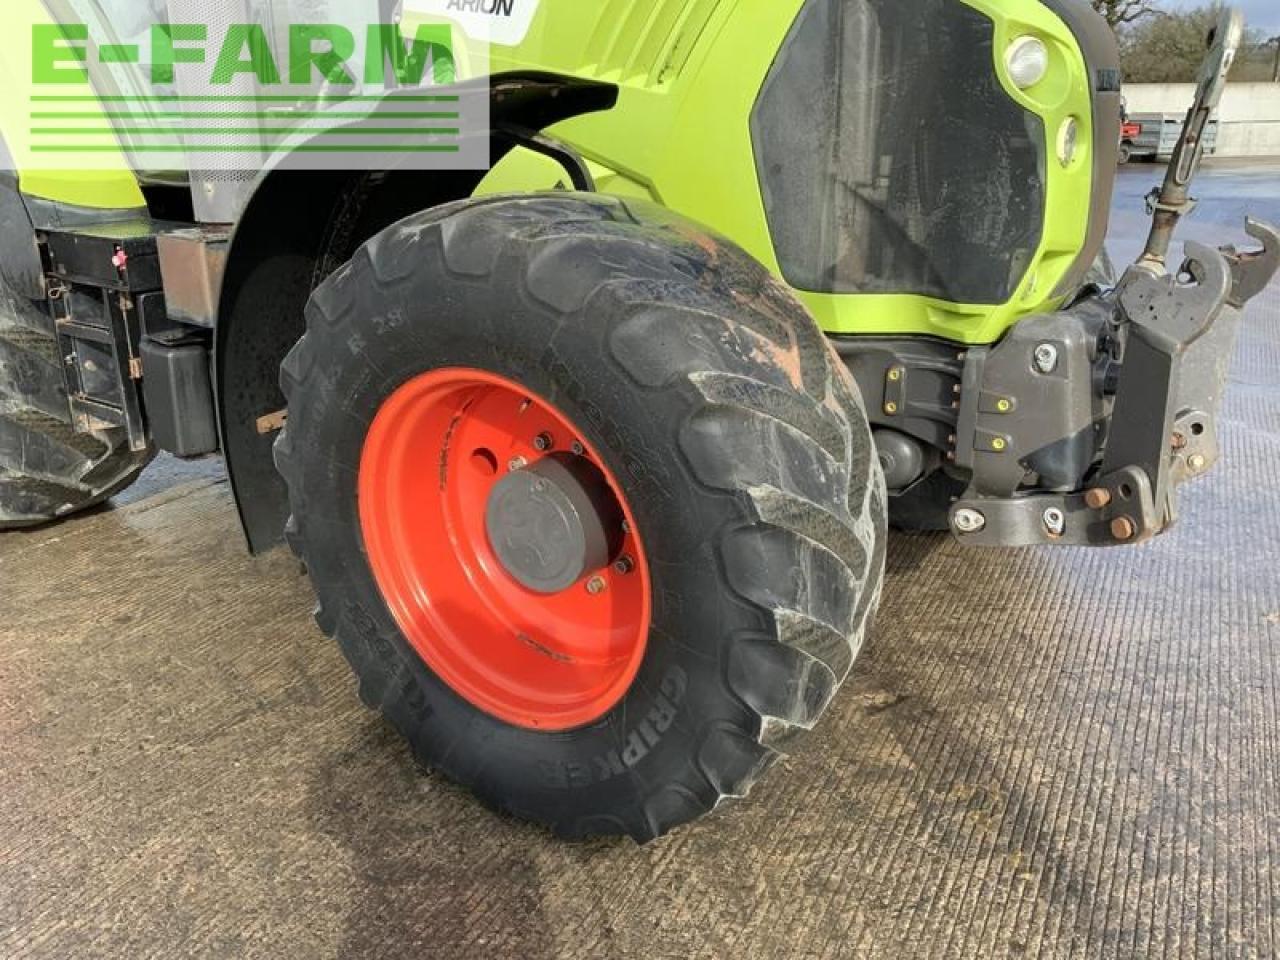 Tracteur agricole CLAAS 650 arion tractor (st15805)